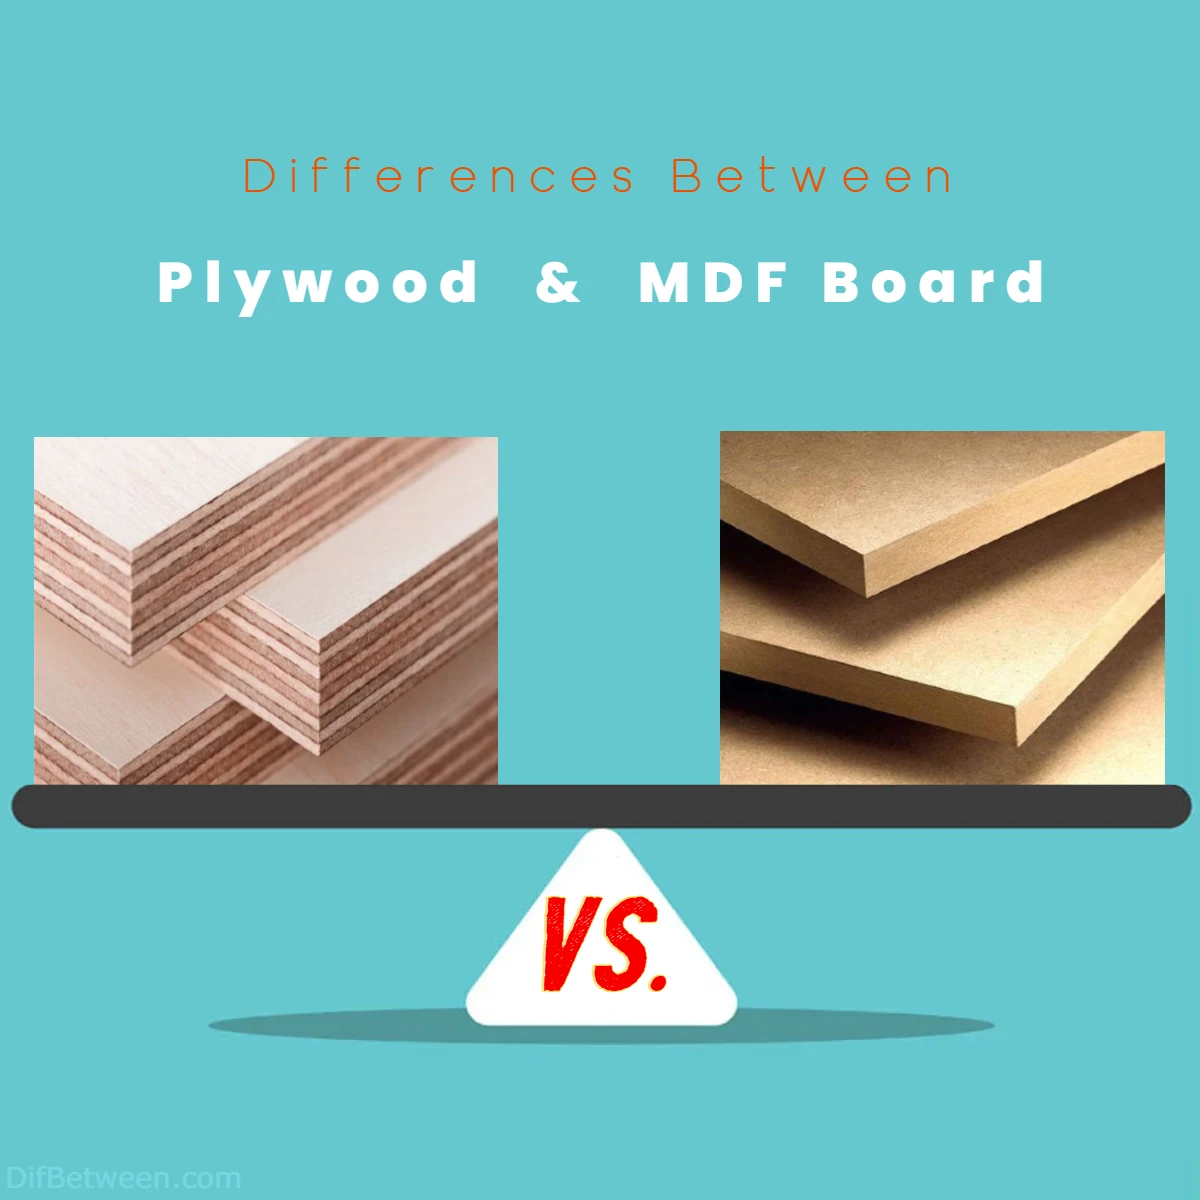 Differences Between Plywood vs MDF Board